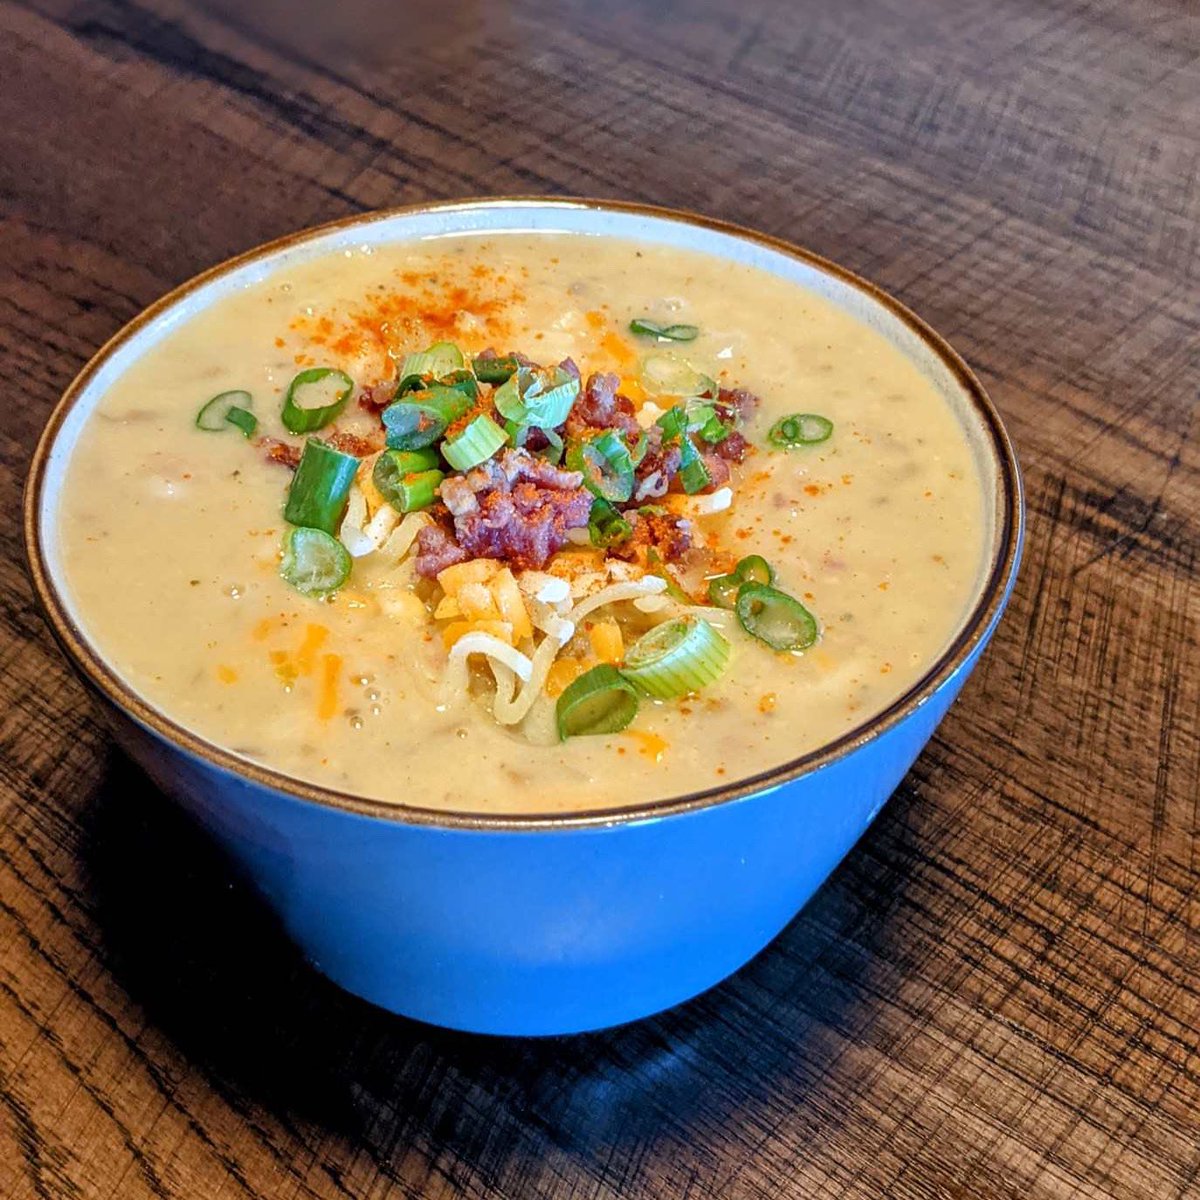 Loaded Potato Soup has been added to our menu, so it will be available to order every day! It is topped with bacon, cheddar & green onions. It is even Gluten friendly! #medhat #bbq #smokehouse #soup #loadedpotato #availableeveryday #newmenuitem #bacon #glutenfree